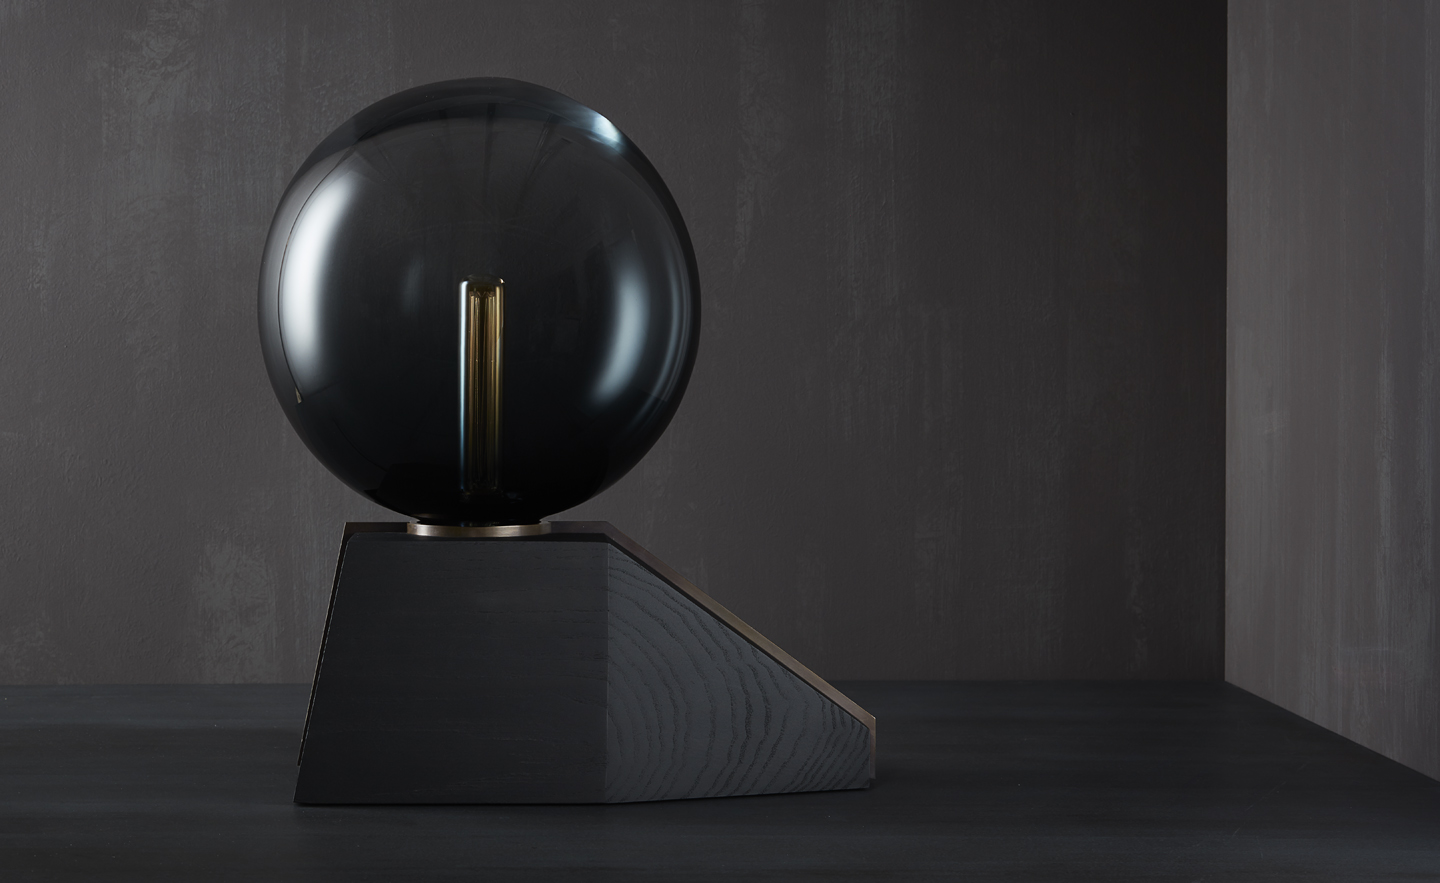 Table lamp designed by Studioloop, with Murano glass globe, blackened ash base and bronze strap detail